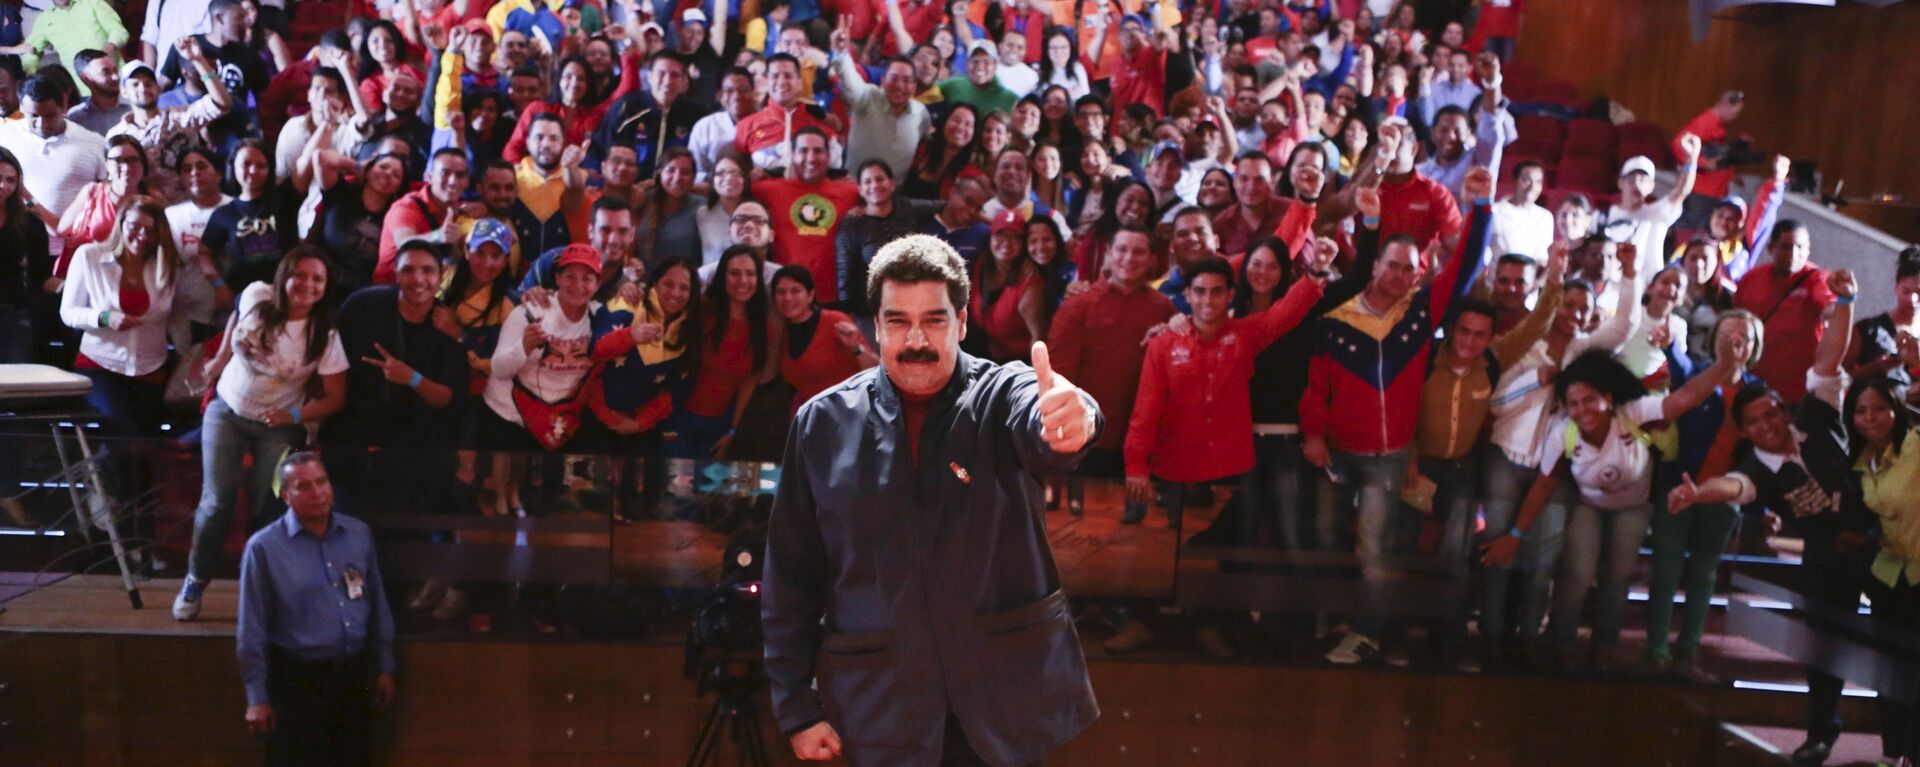 Venezuela's President Nicolas Maduro (C) poses for a photo during a meeting with members of the United Socialist Party of Venezuela (PSUV), in Caracas, in this May 27, 2015 handout picture provided by Miraflores Palace. - Sputnik Mundo, 1920, 25.05.2021